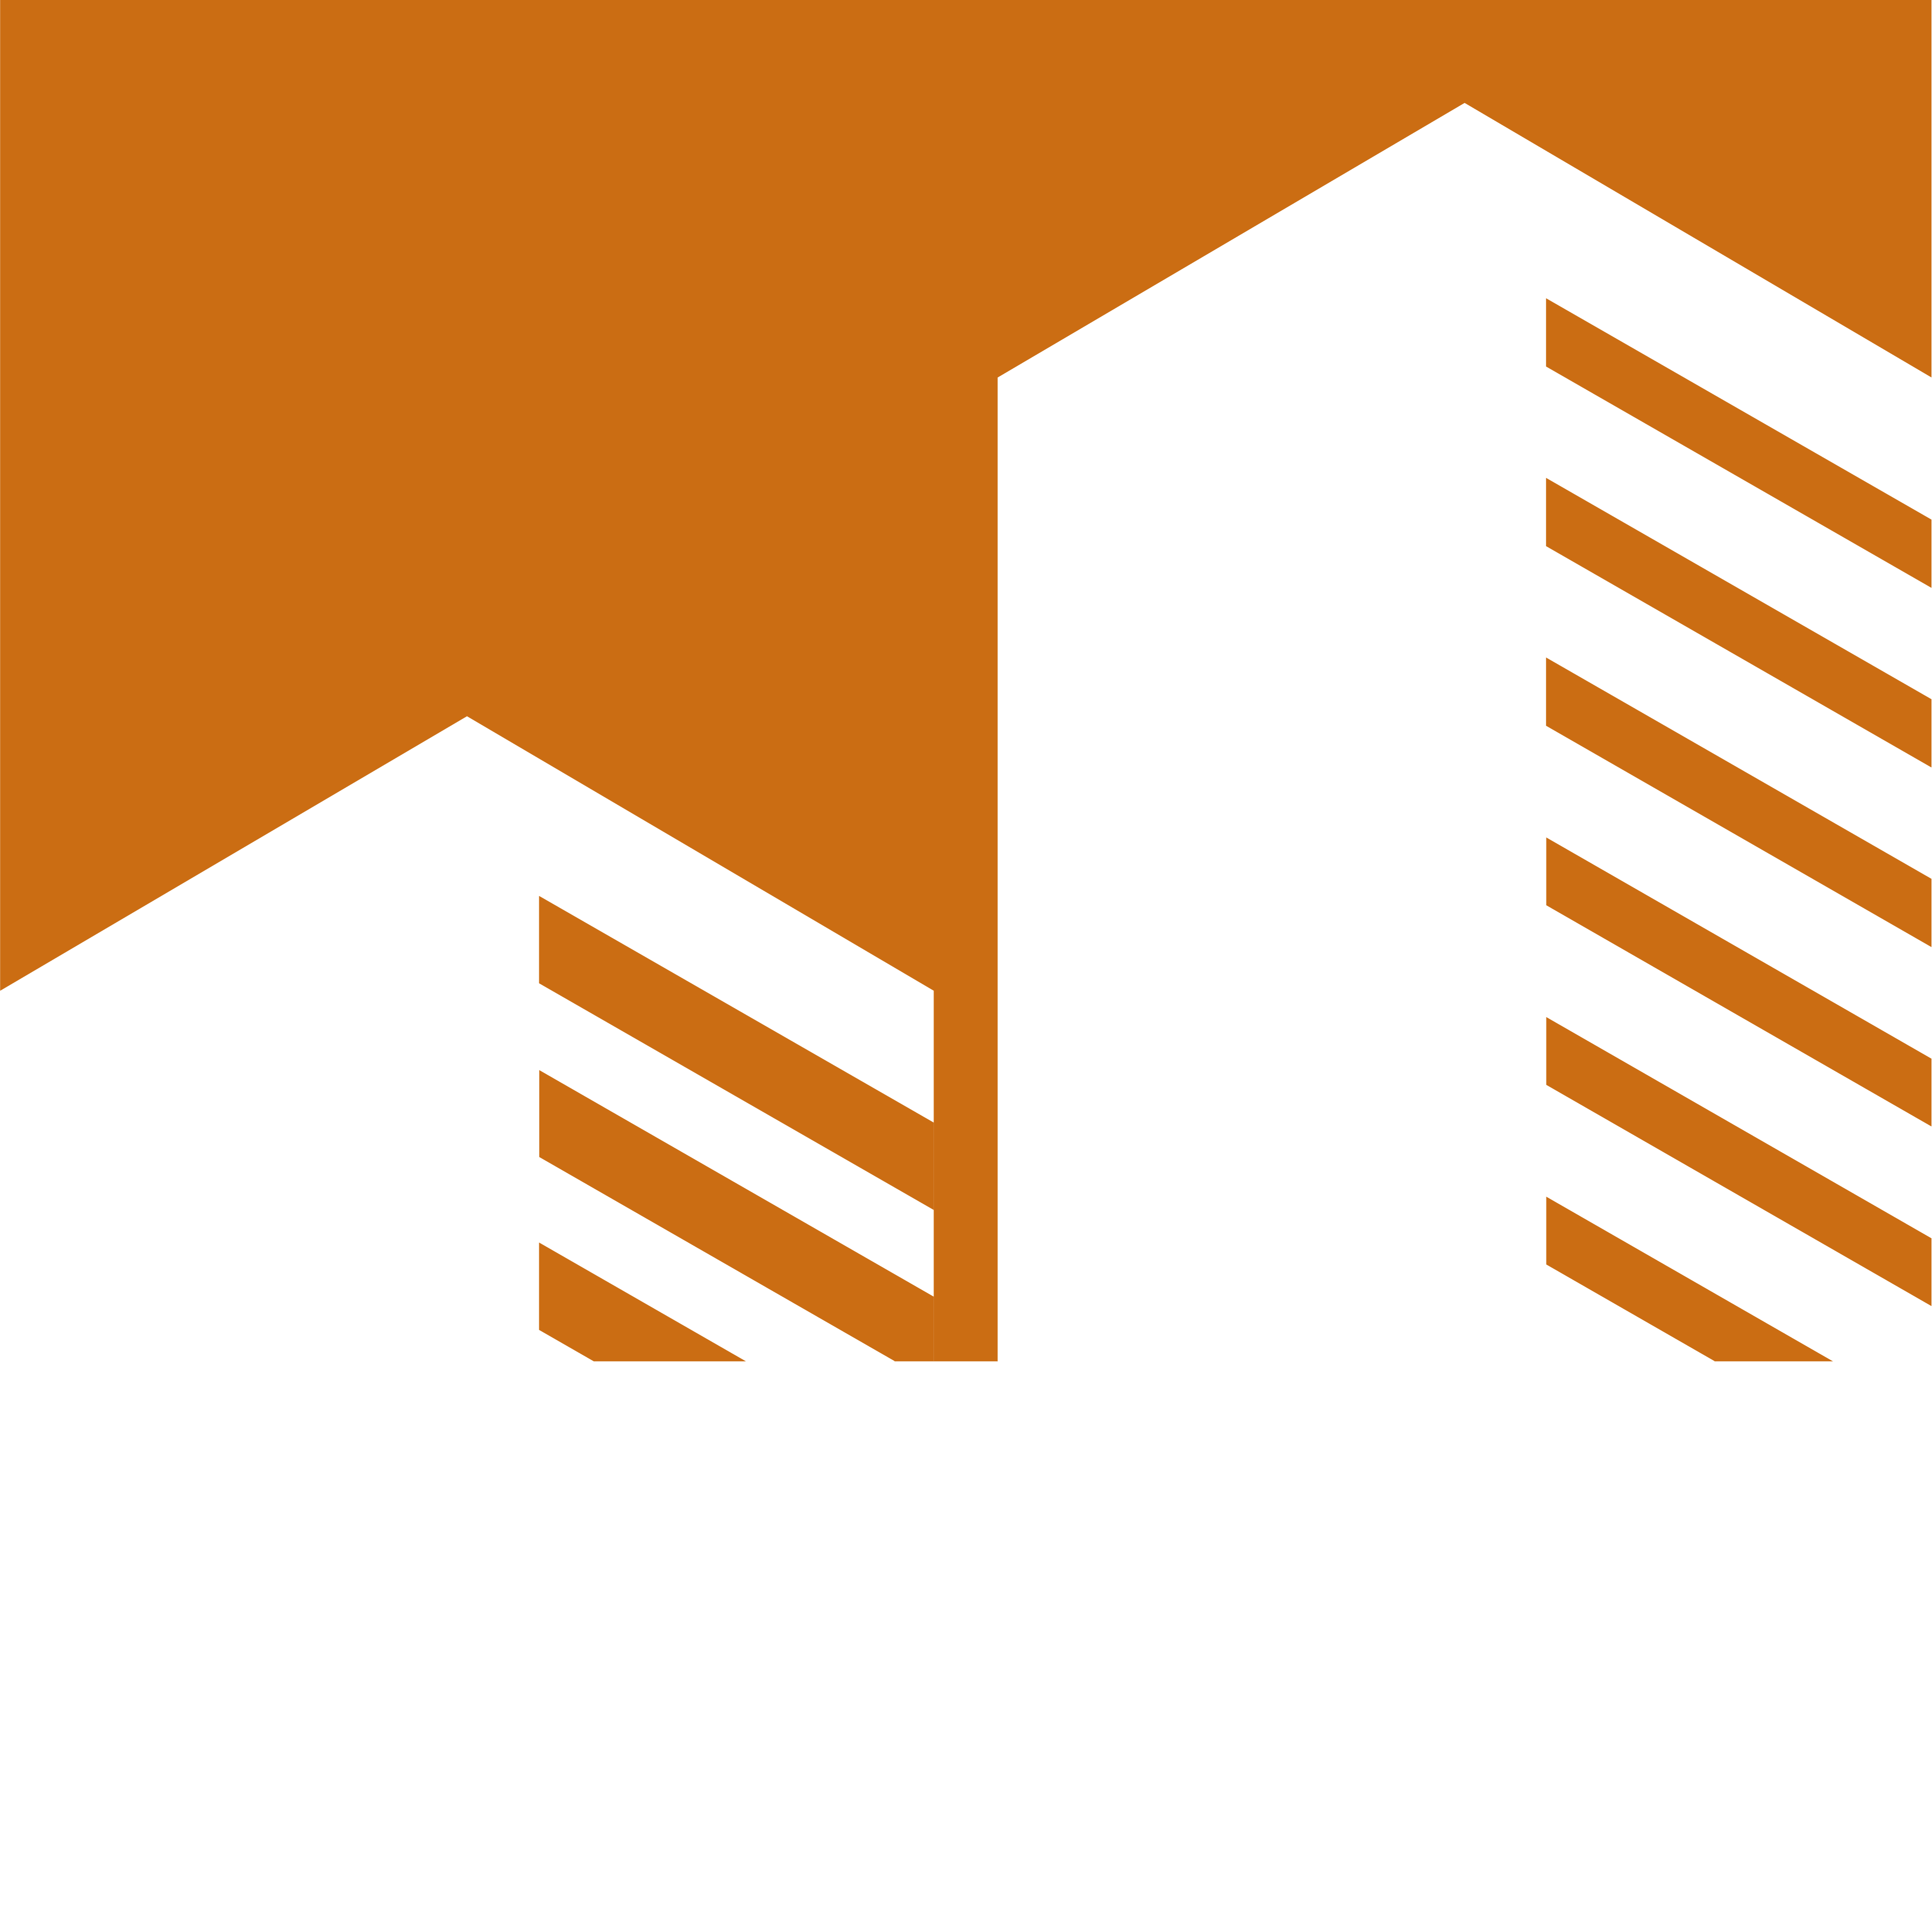 Evermark Limited